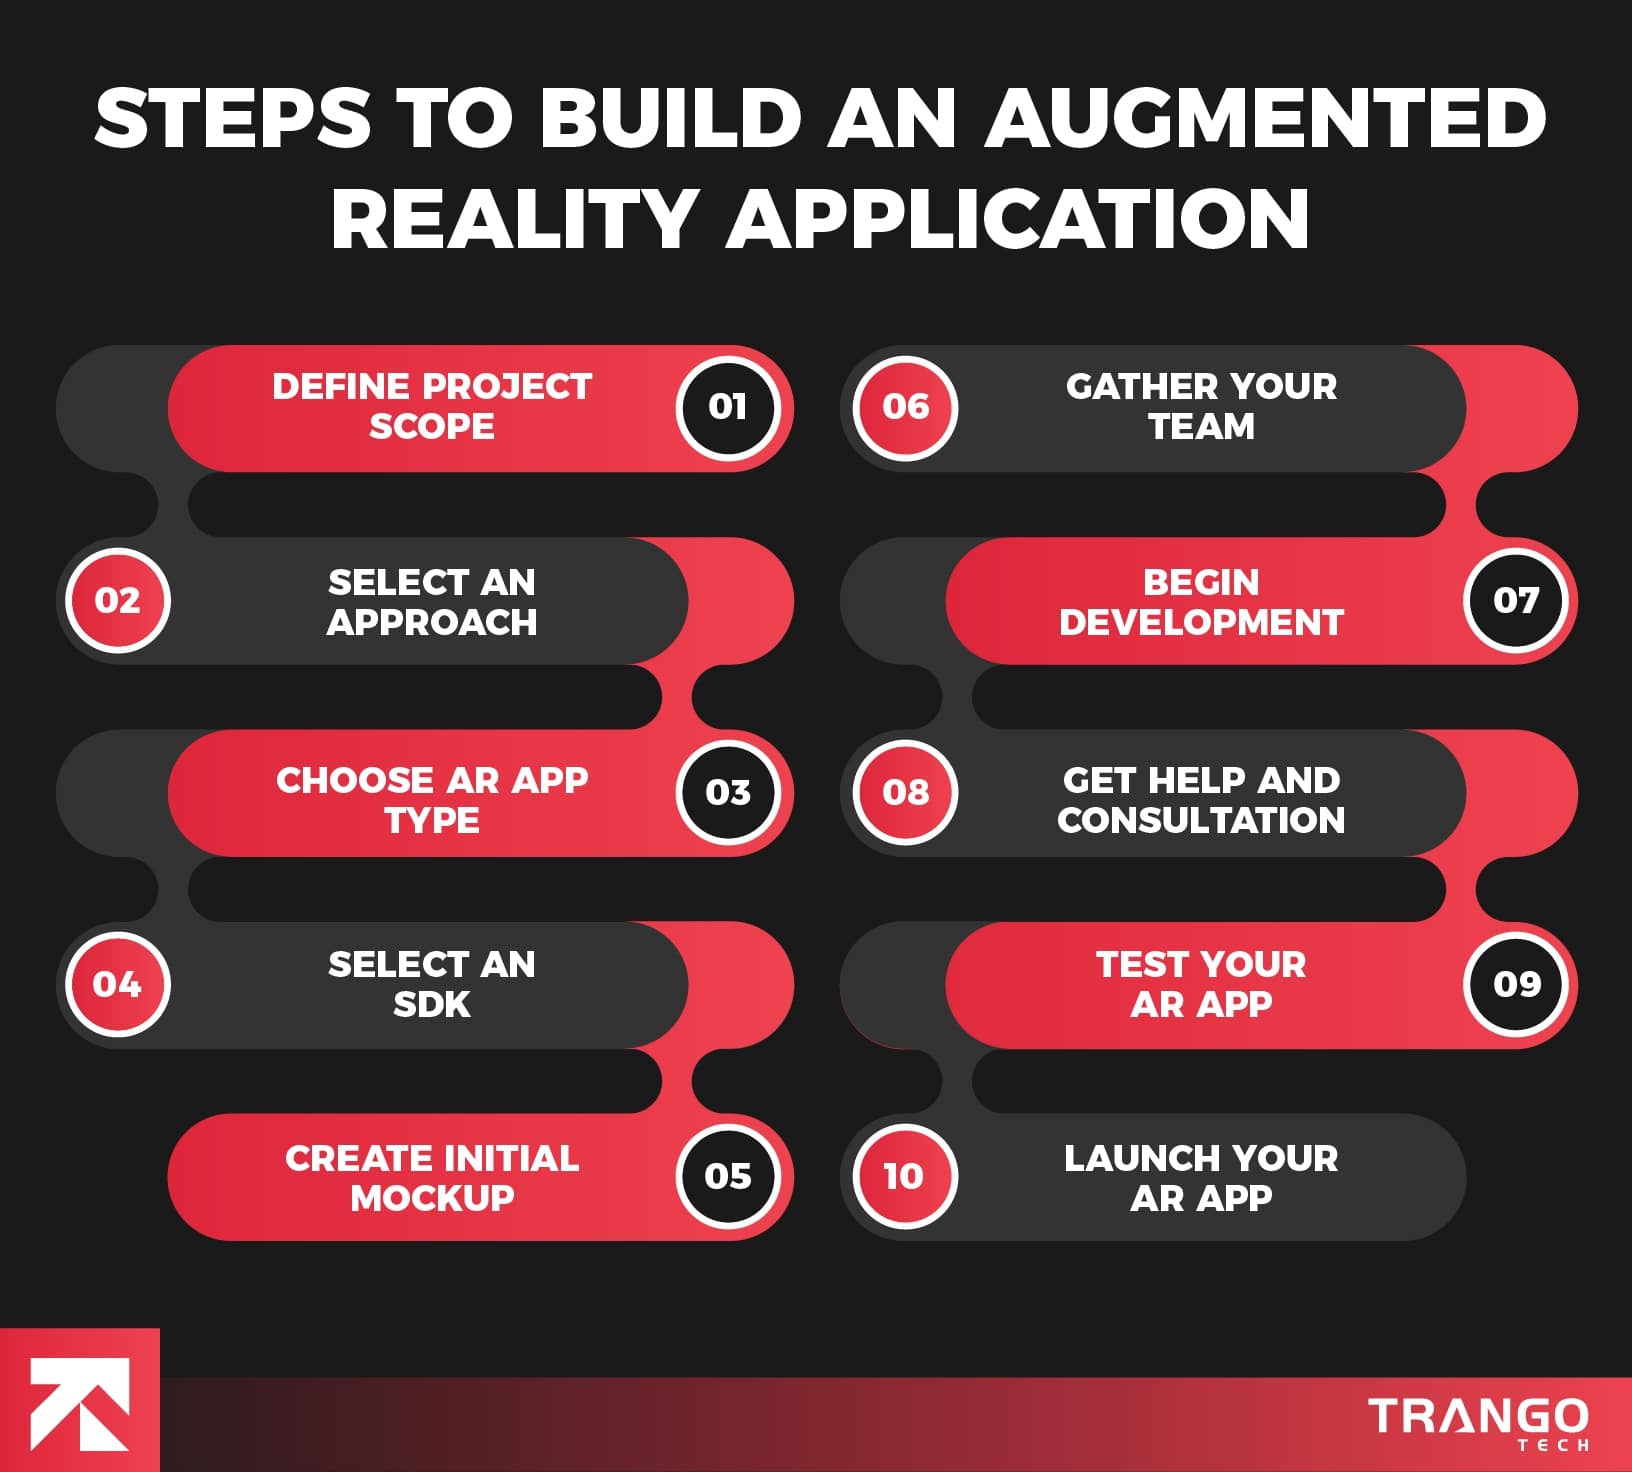 infographic showing 10 steps to build augmented reality application